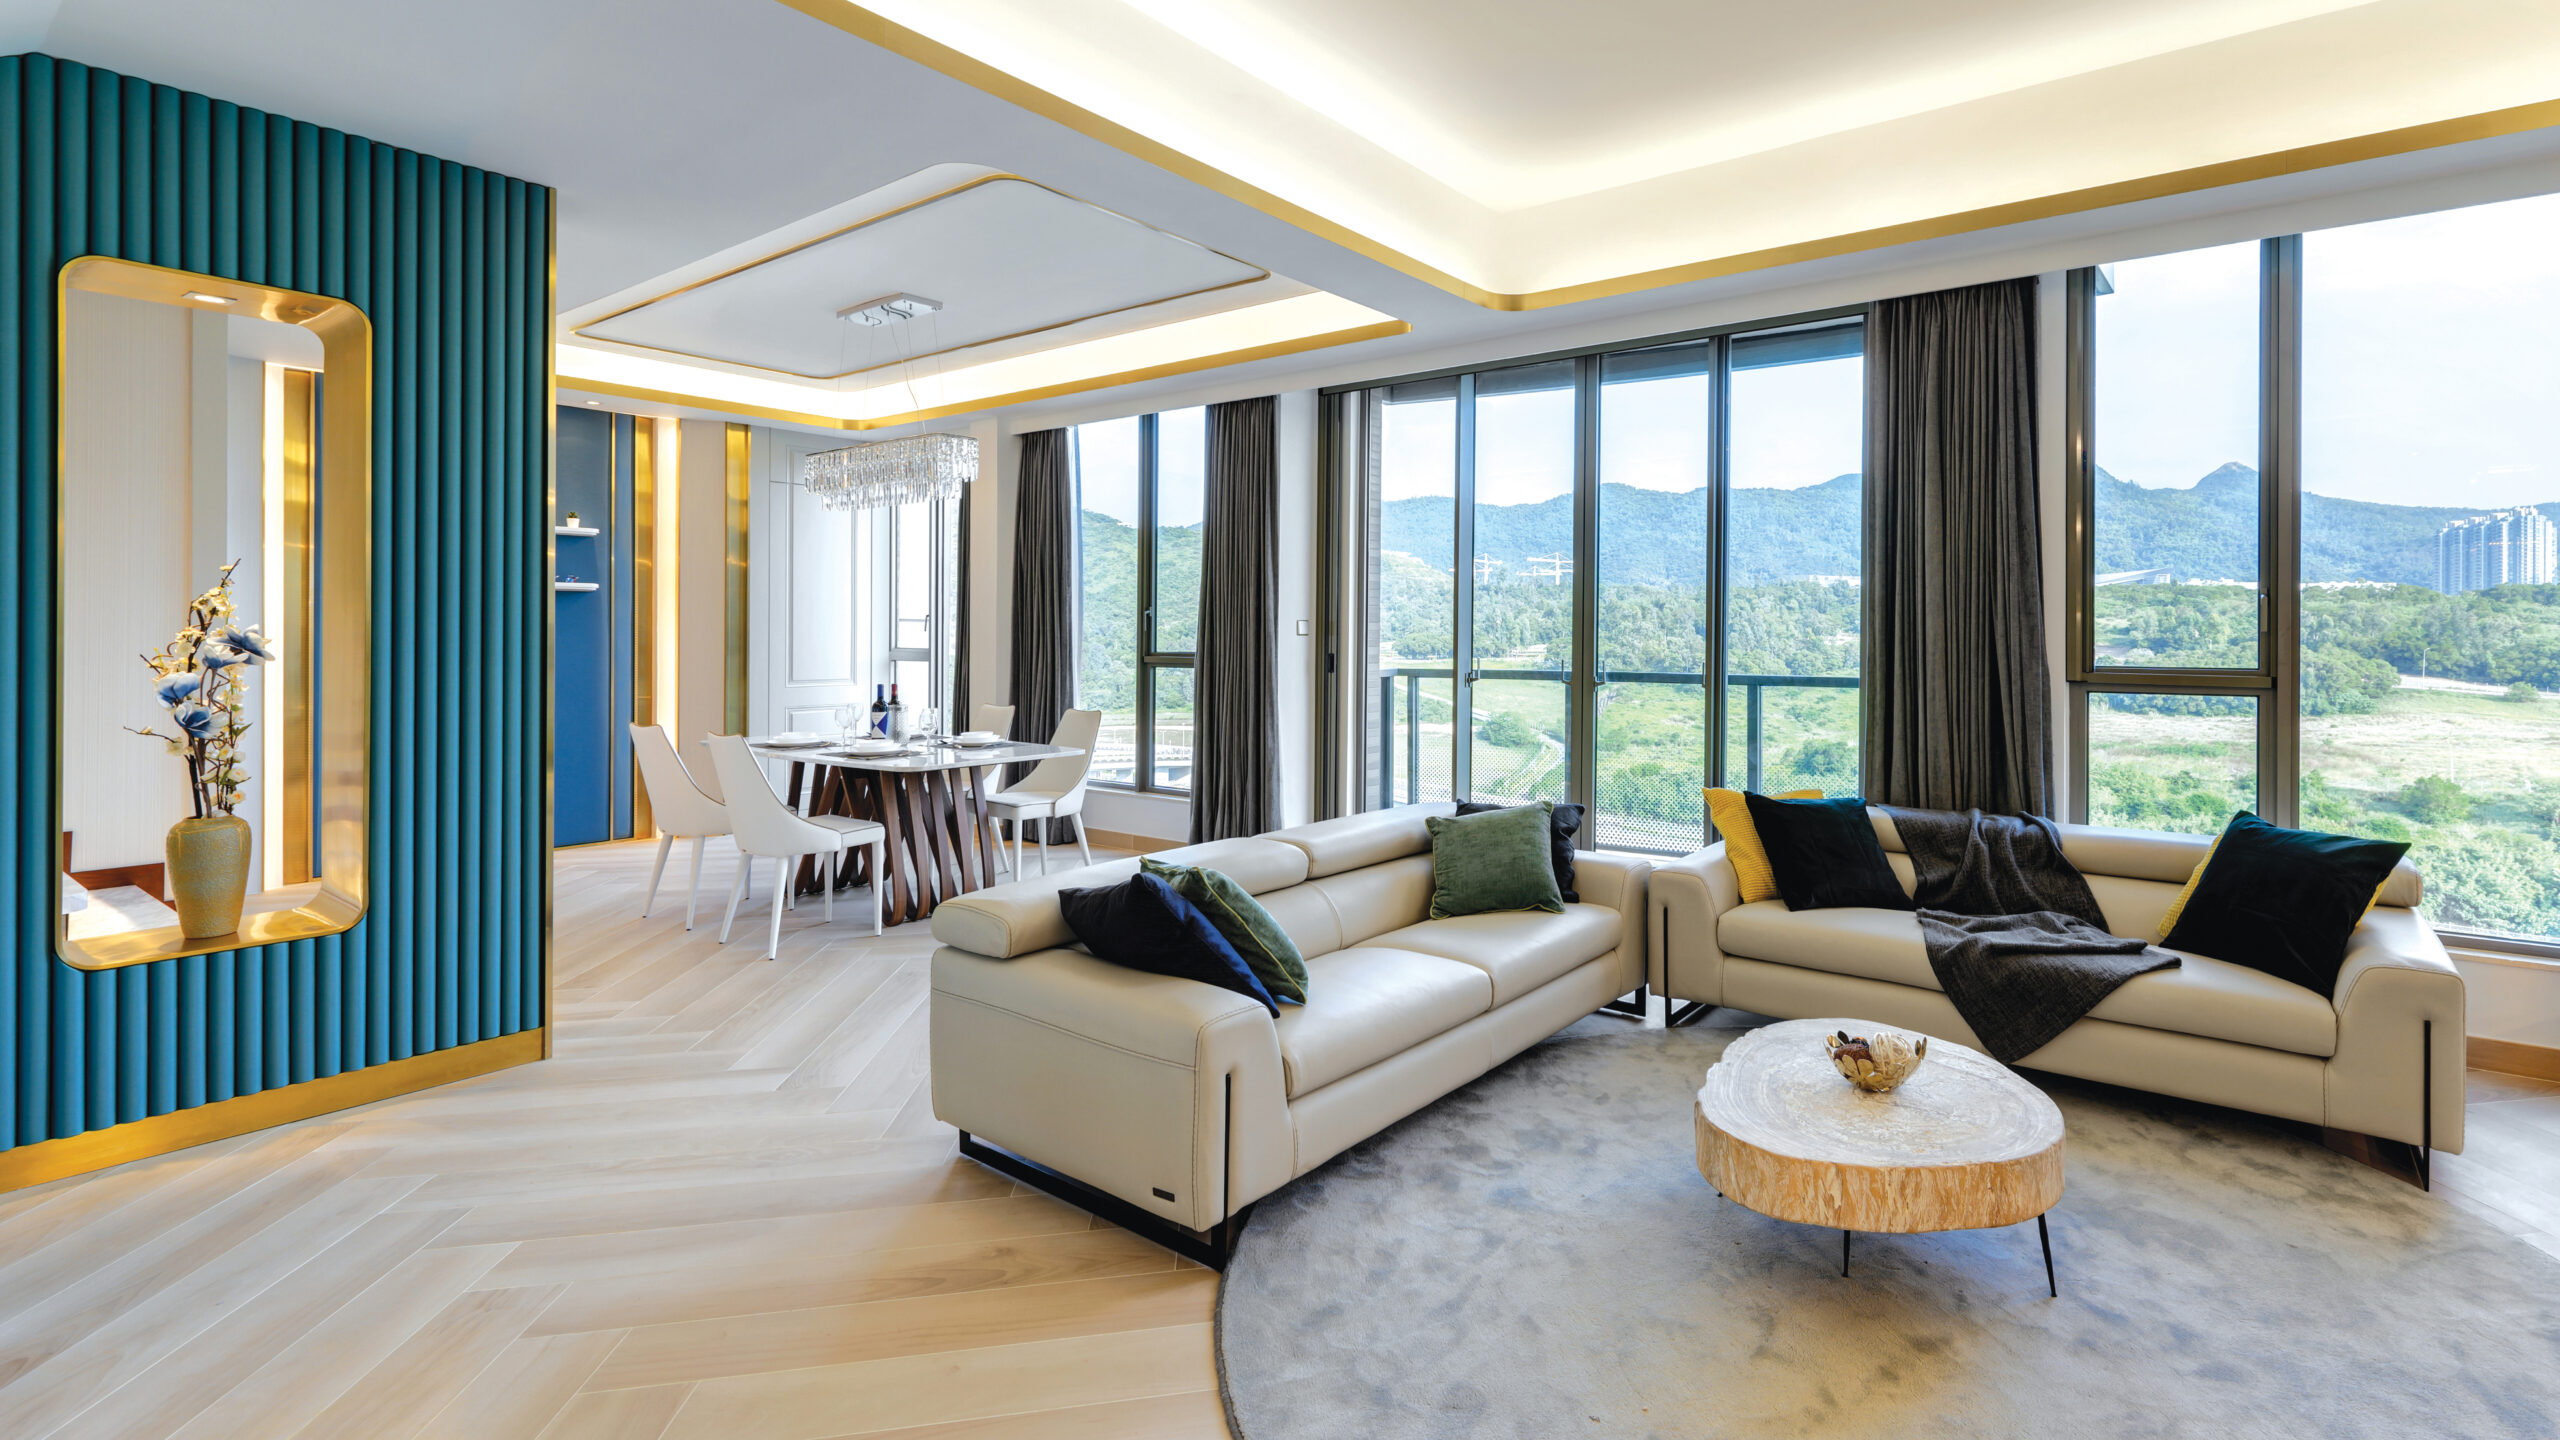 Papillionaire’s Row – Tseung Kwan O’s Papillions’ development combines absolute luxury with homeliness